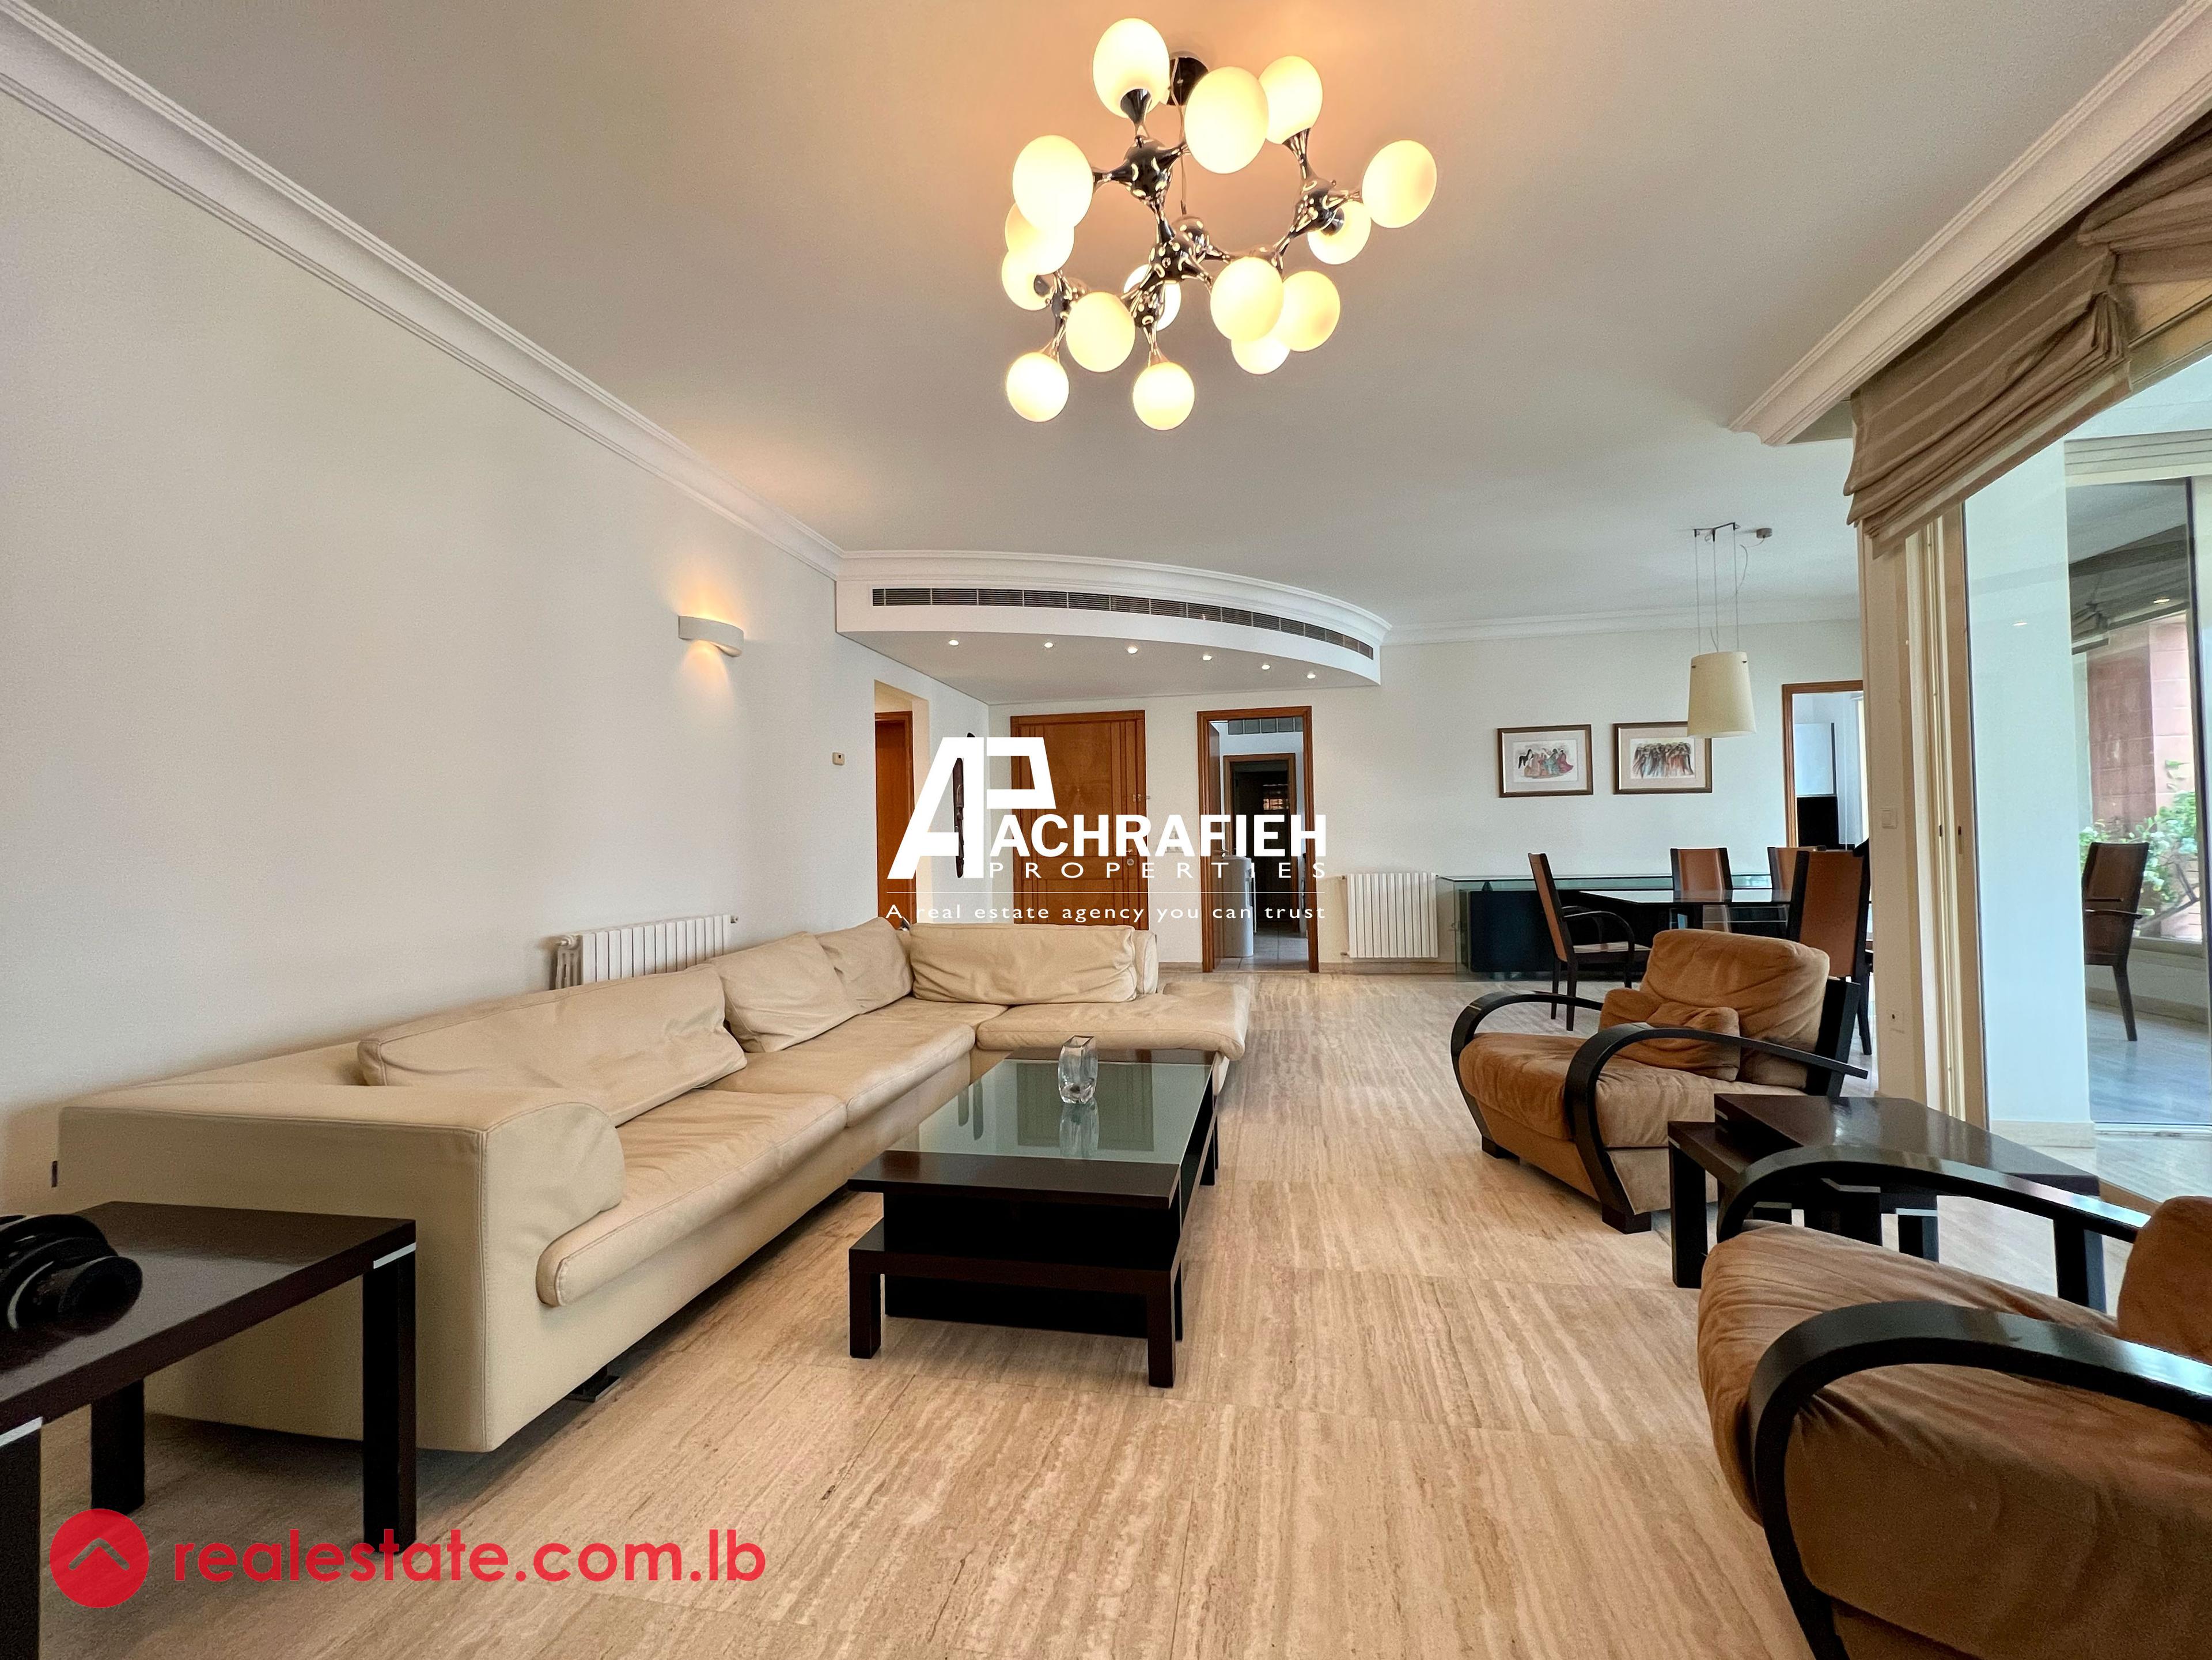 24/7 Electricity | Apartment For Sale | In Carré D’or Achrafieh